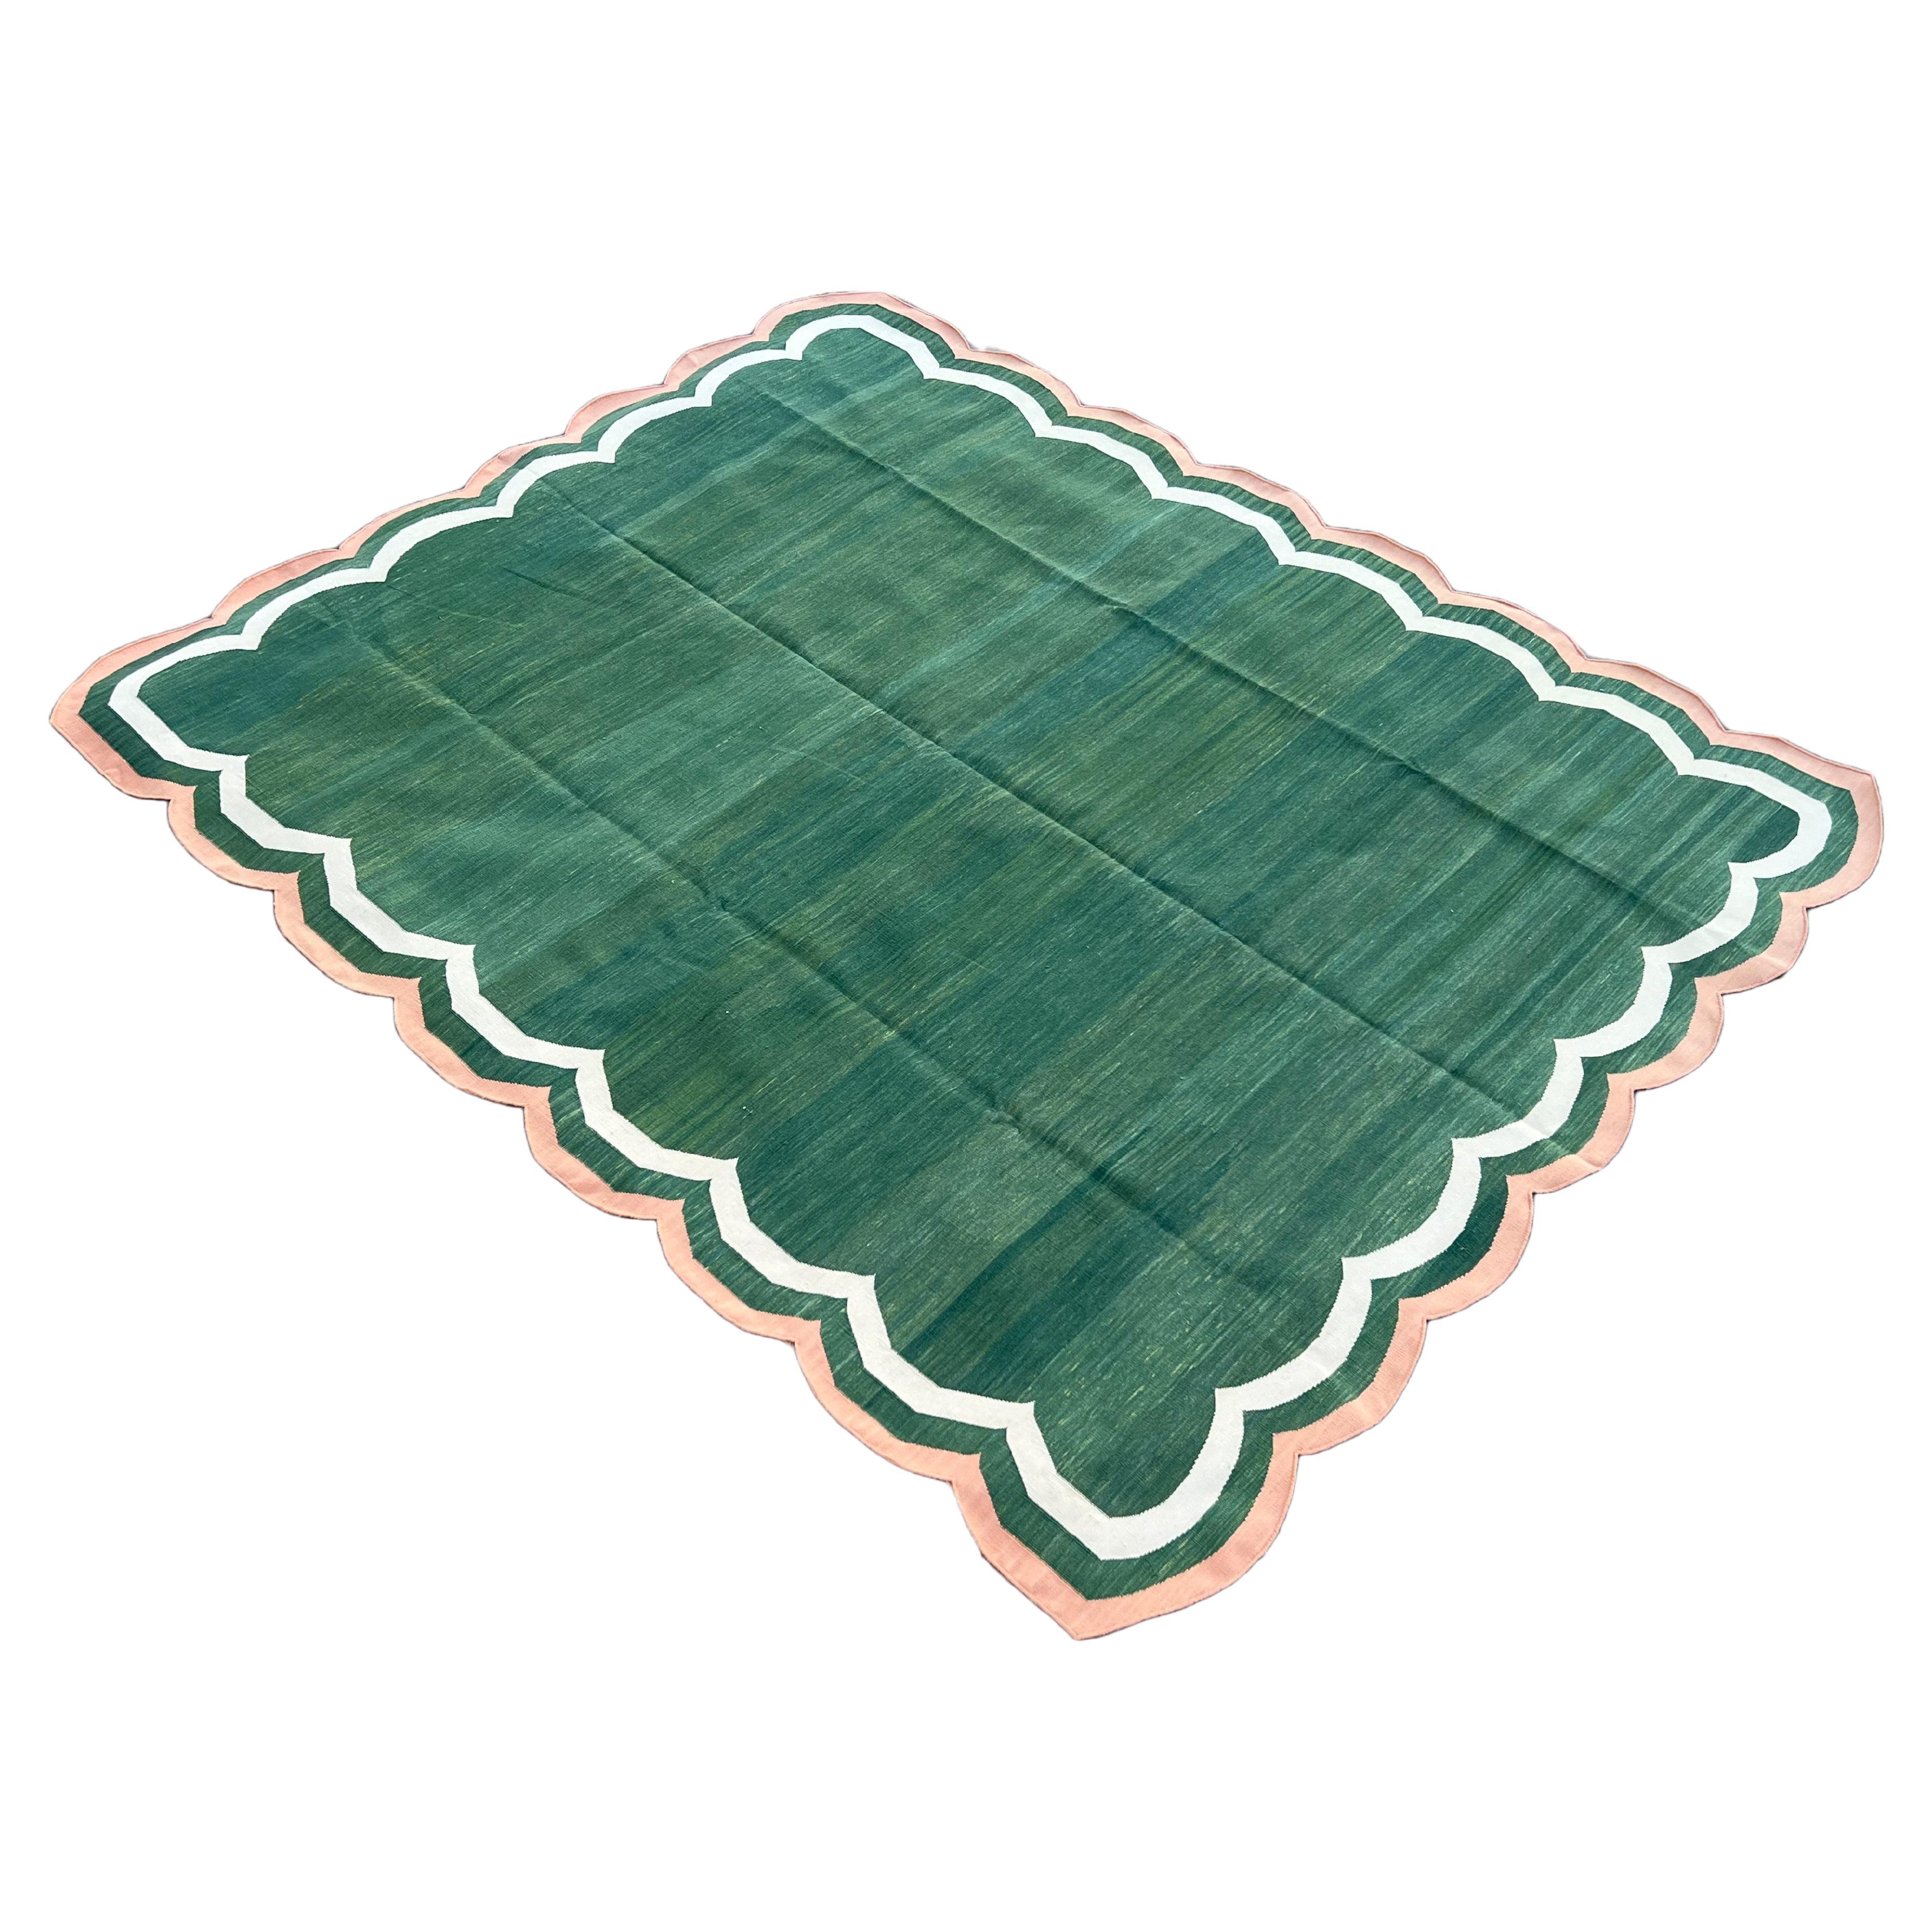 Handmade Cotton Area Flat Weave Rug, 8x10 Green And Coral Scallop Stripe Dhurrie